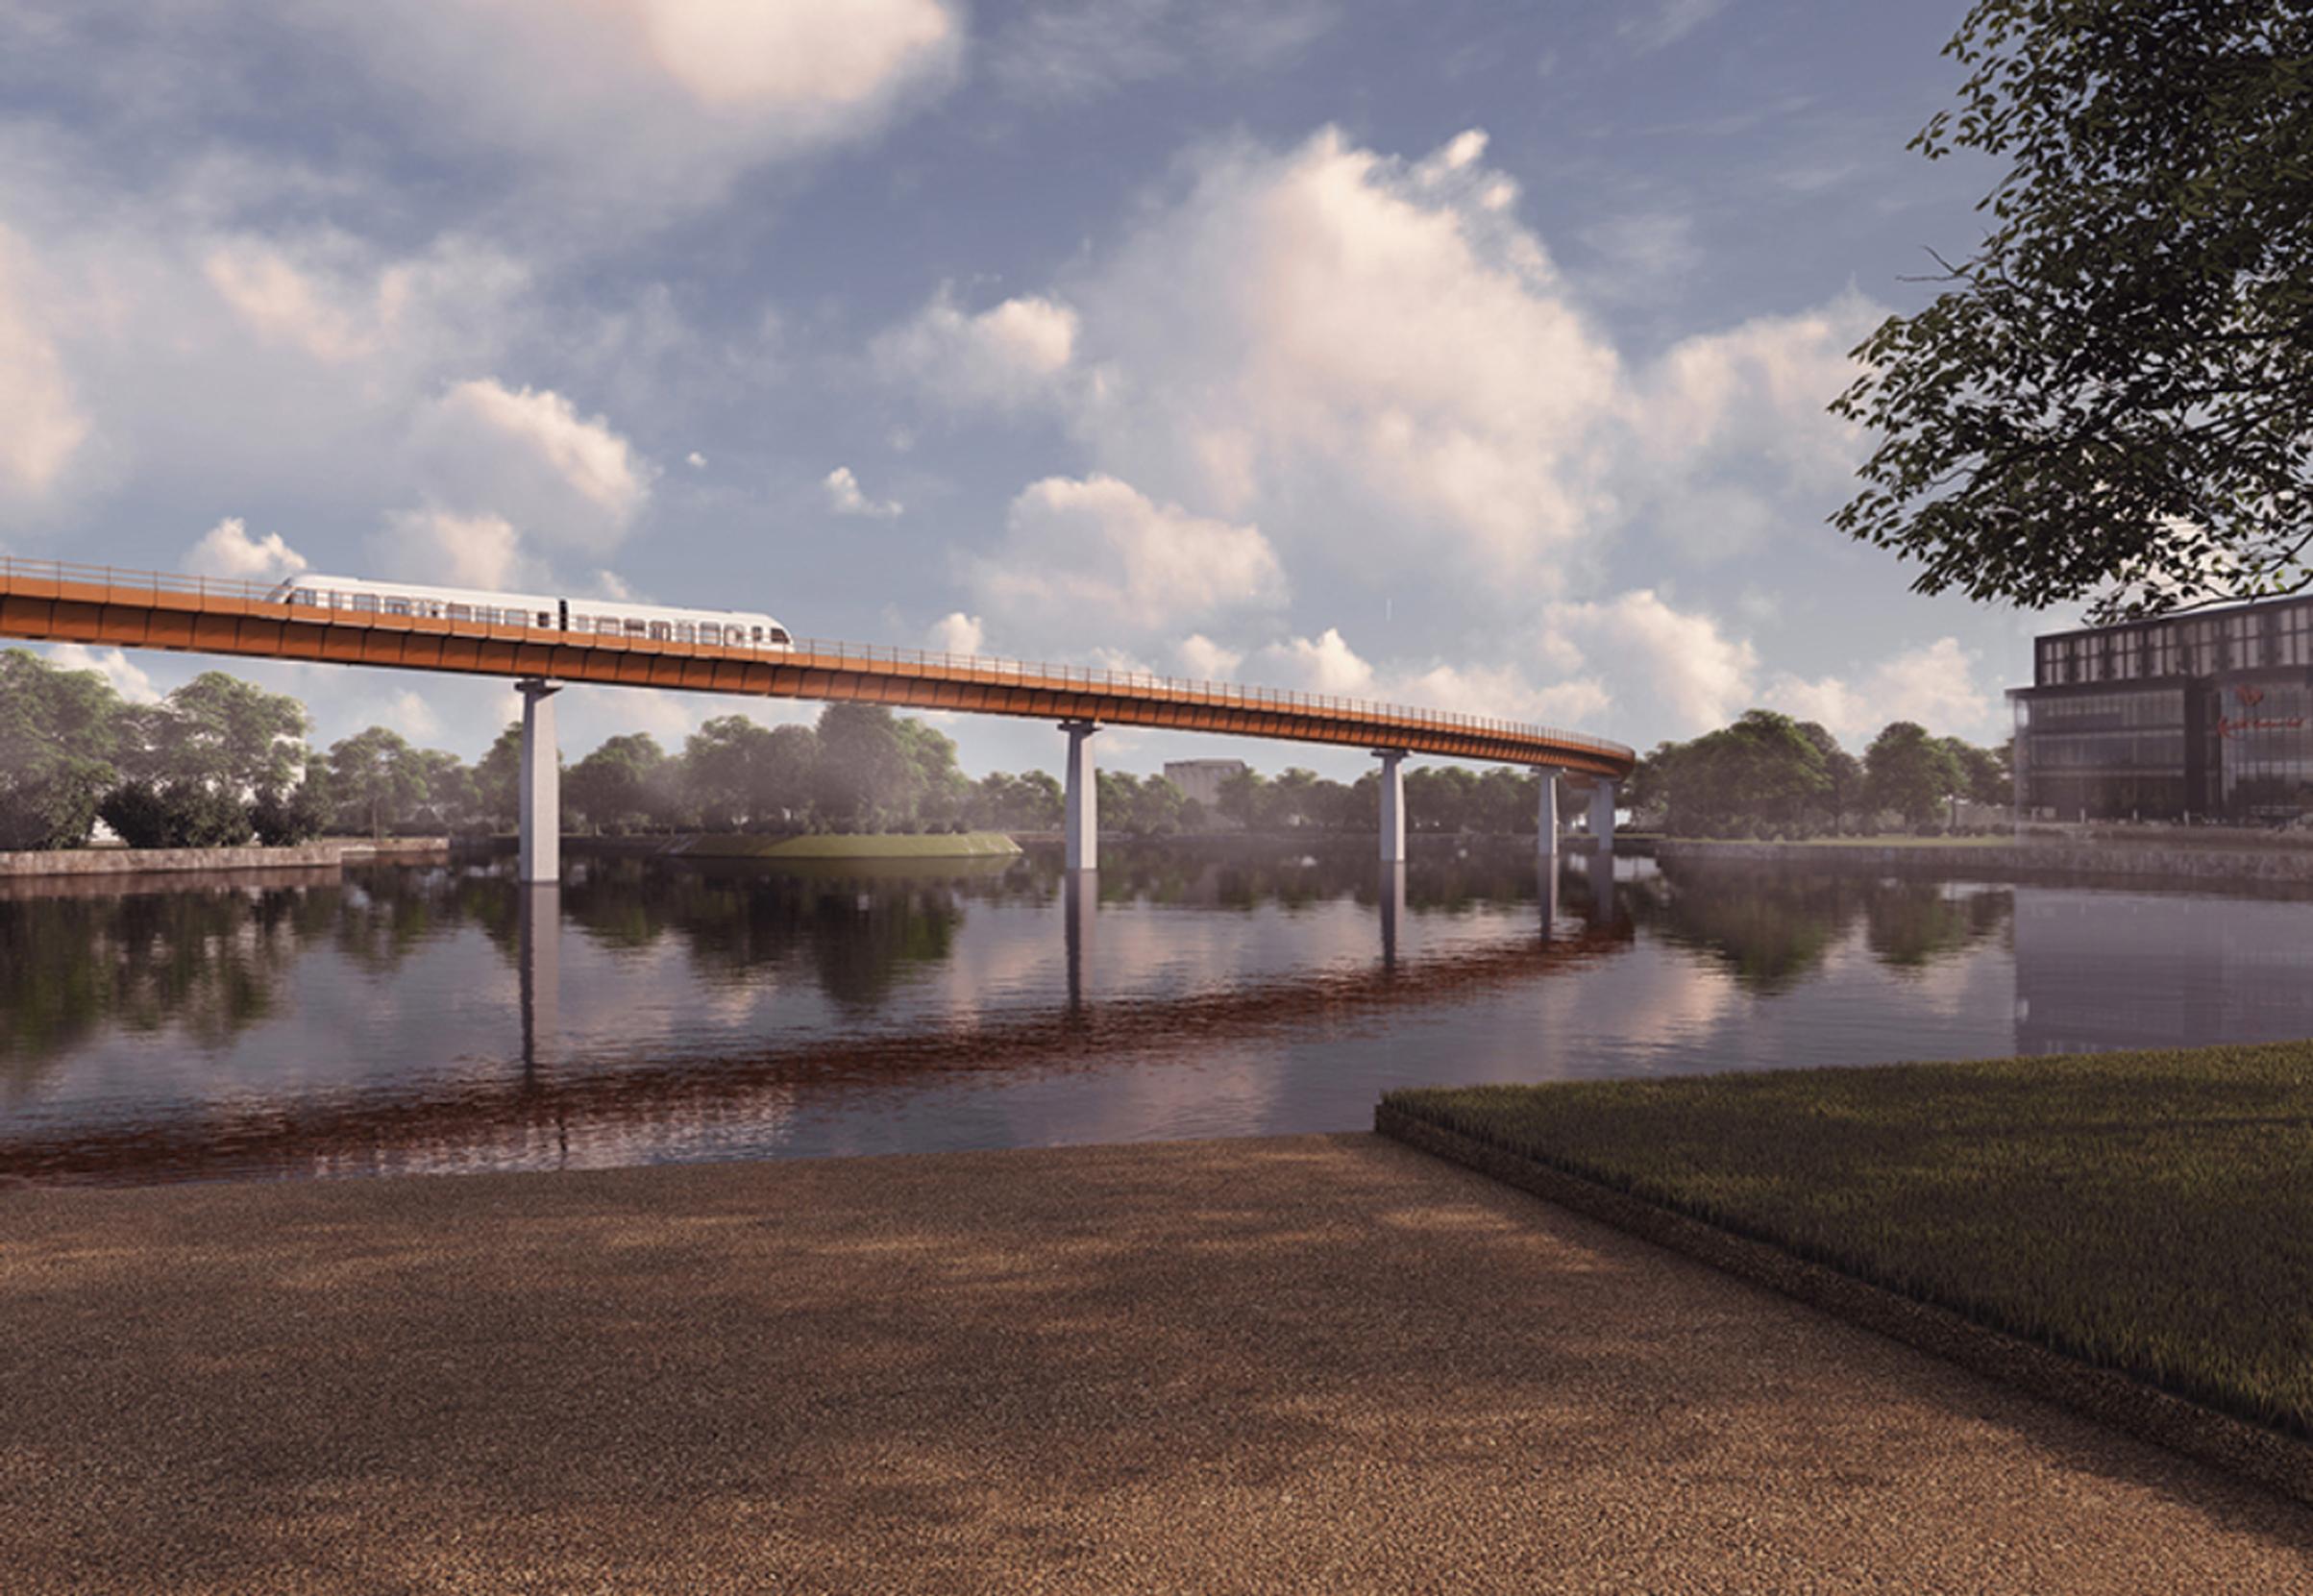 A 2.3km automated people mover will link the Interchange to the NEC